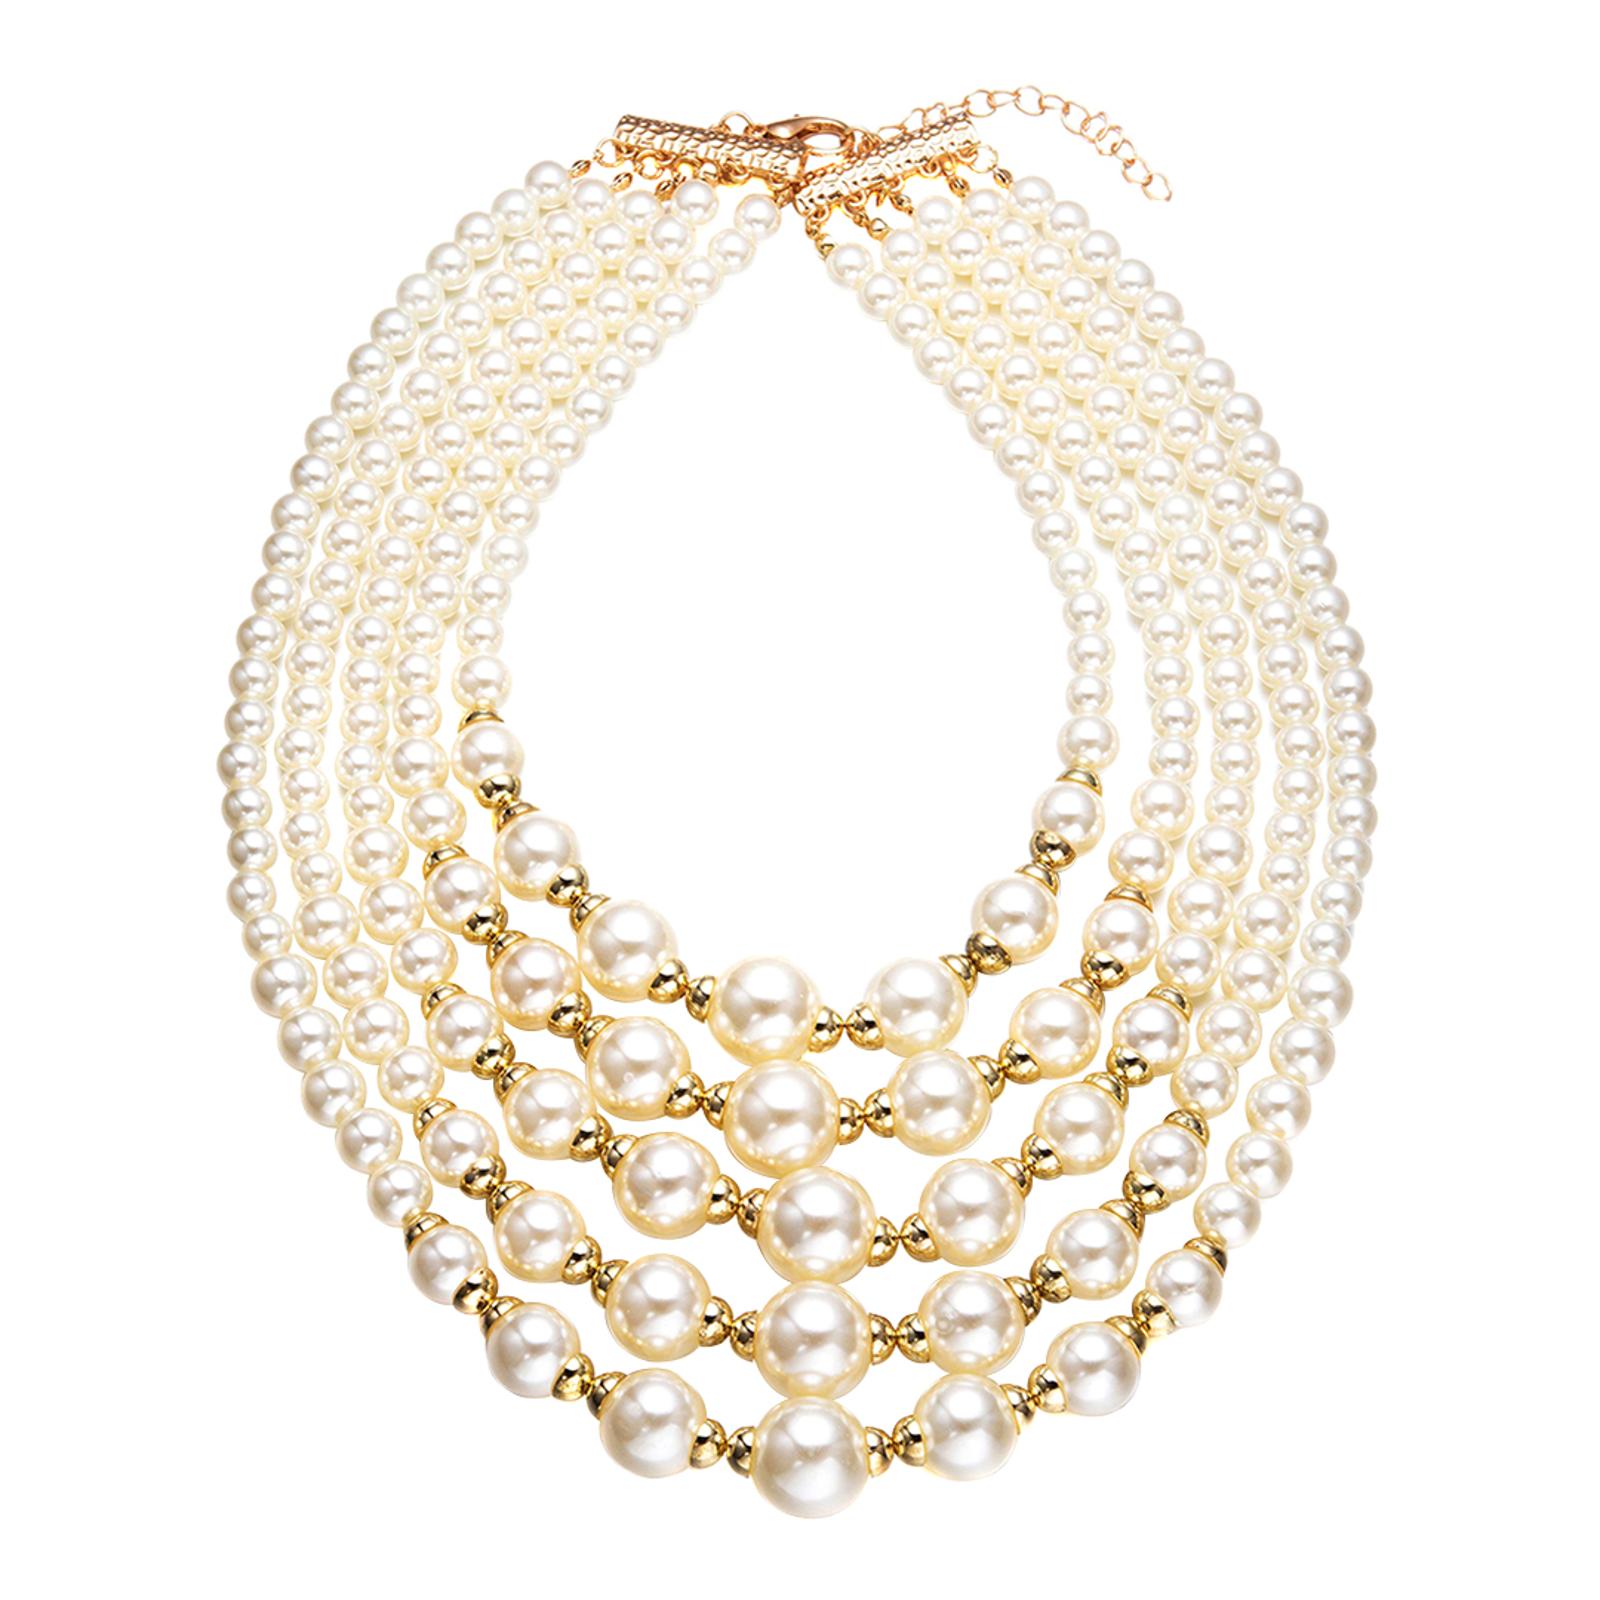 18K Gold Multi Layer Pearl Necklace - BrandAlley